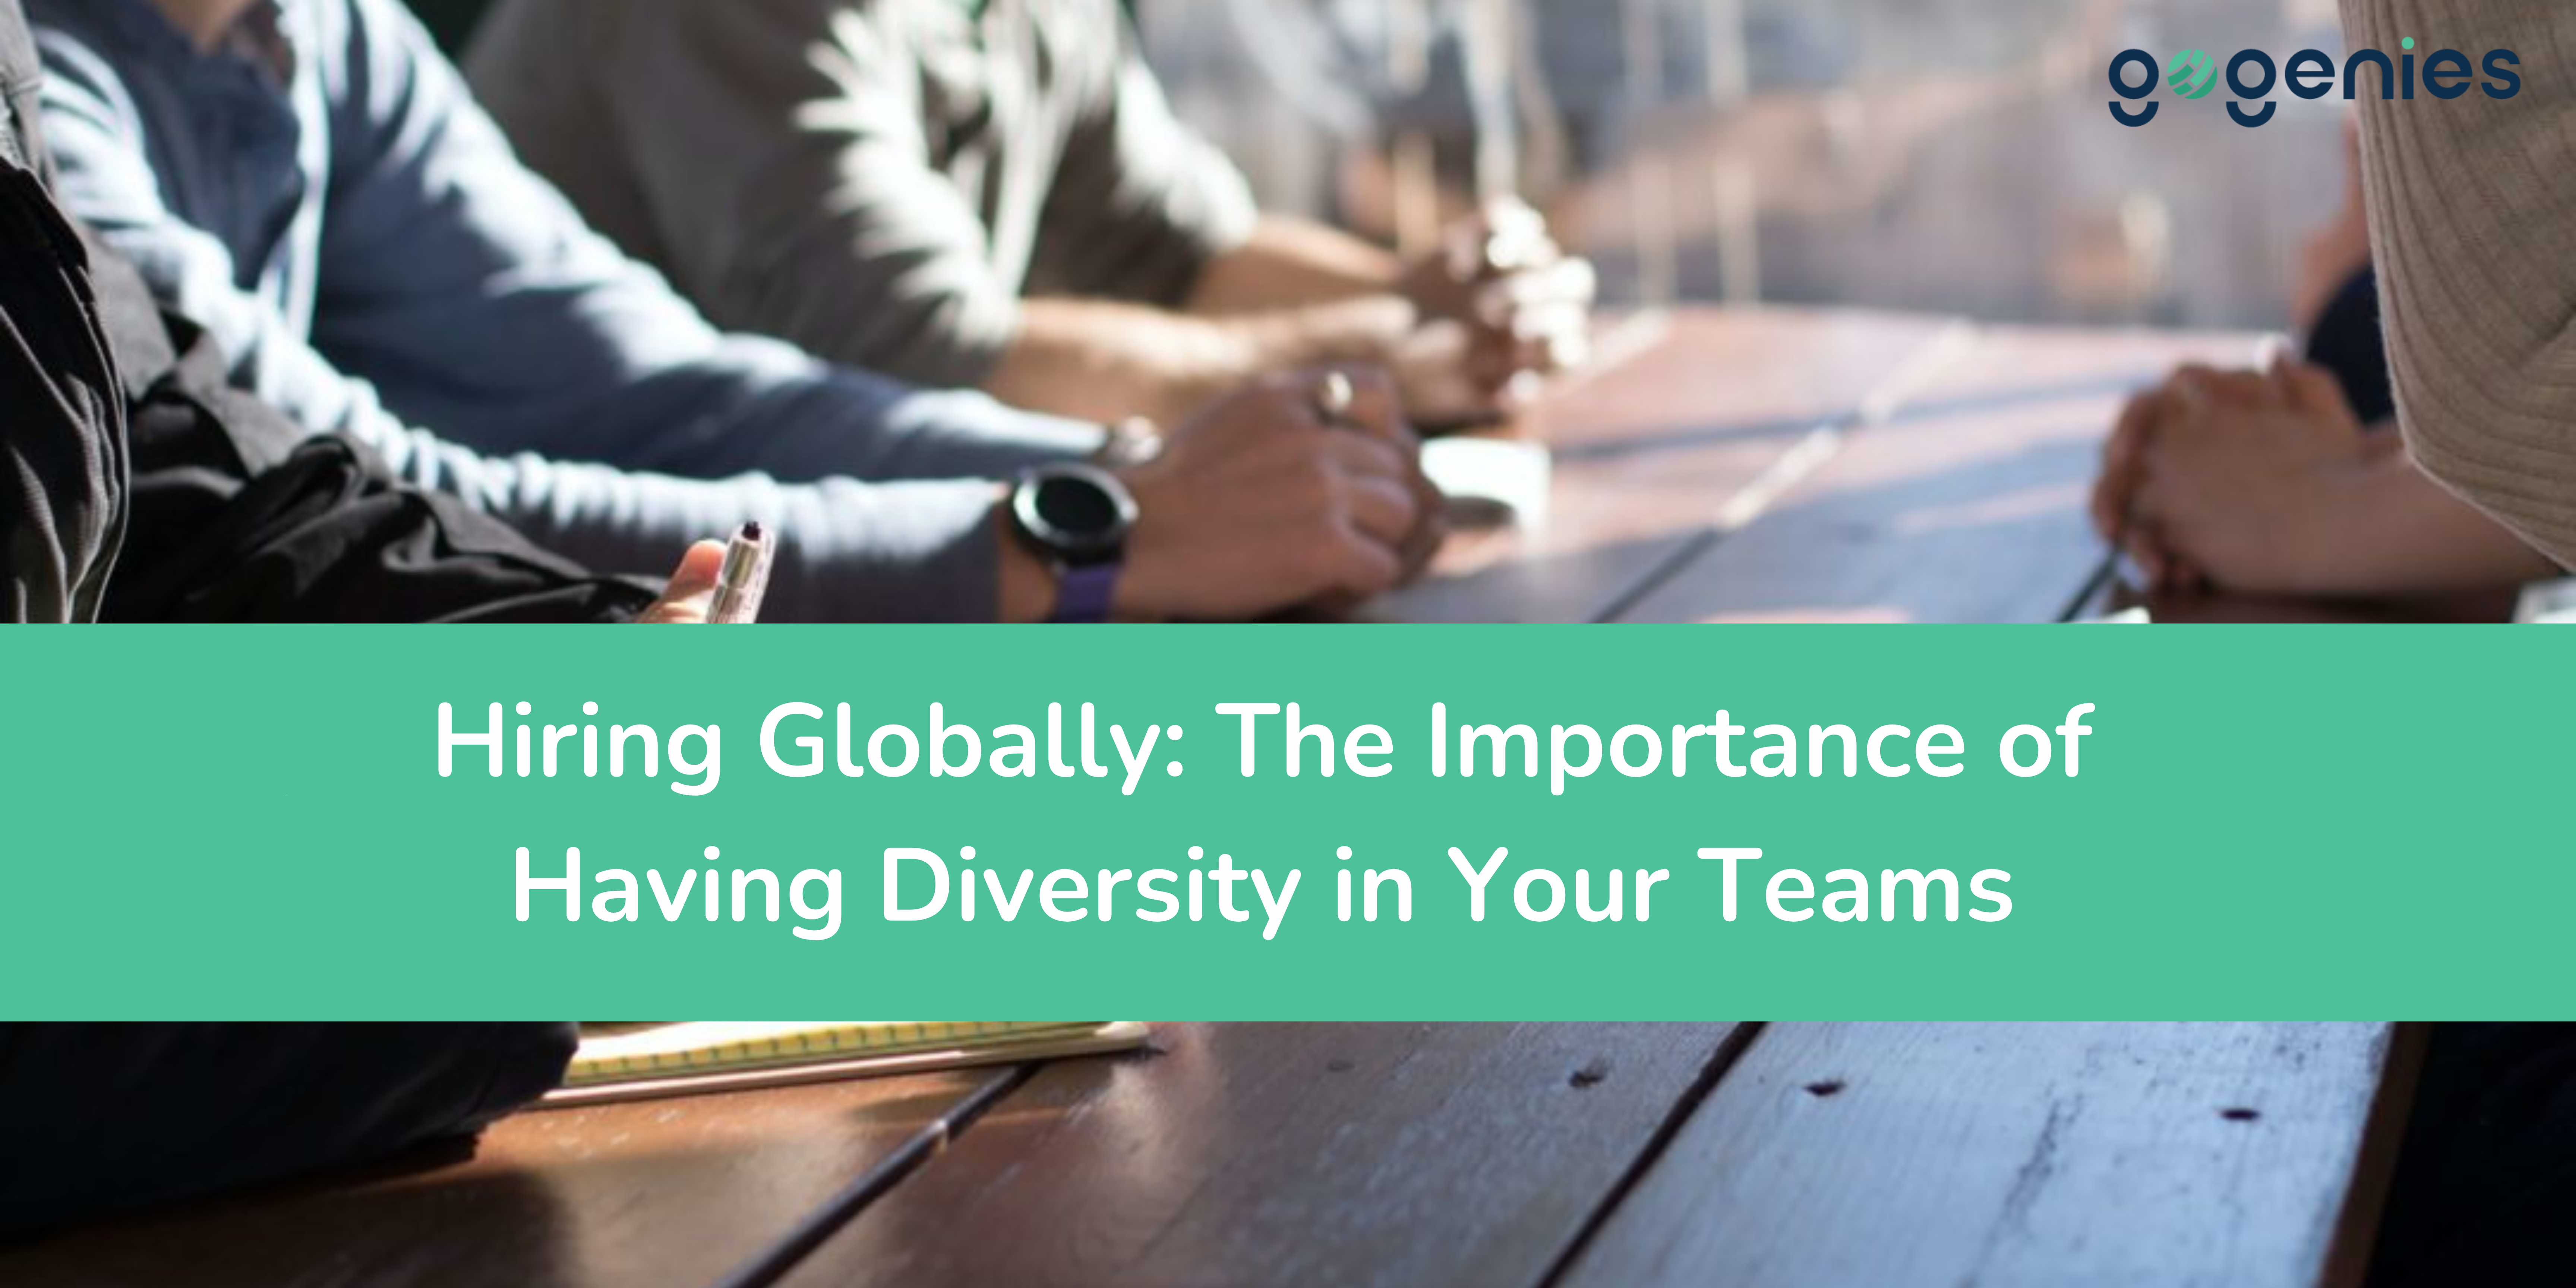 Hiring Globally: The Importance of Having Diversity in Your Teams